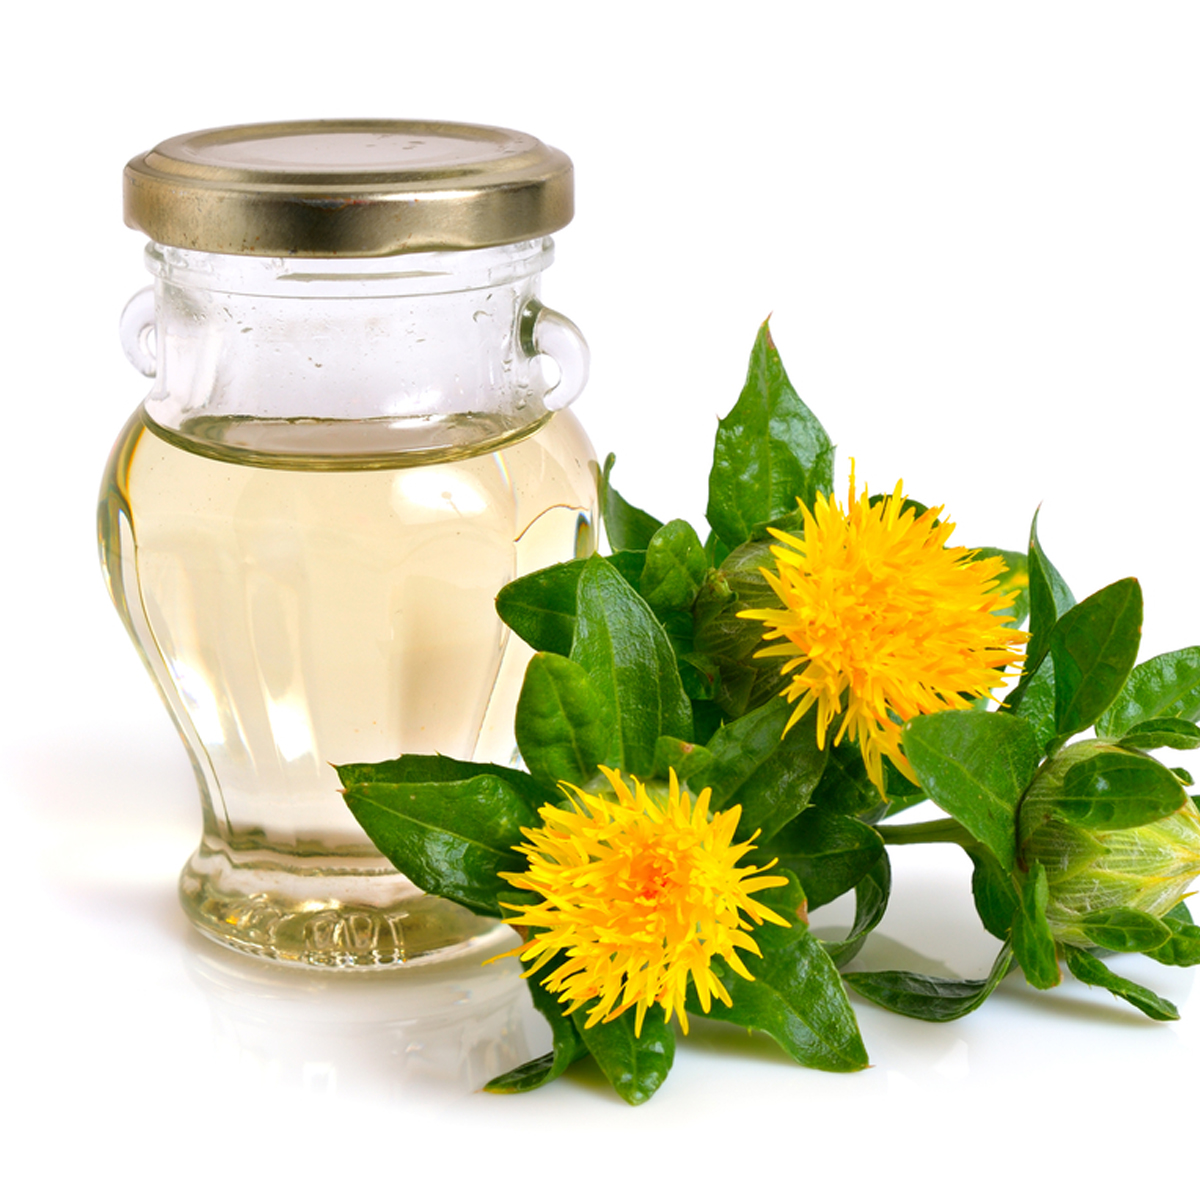 A jar of safflower oil with a sprig of safflowers beside it.